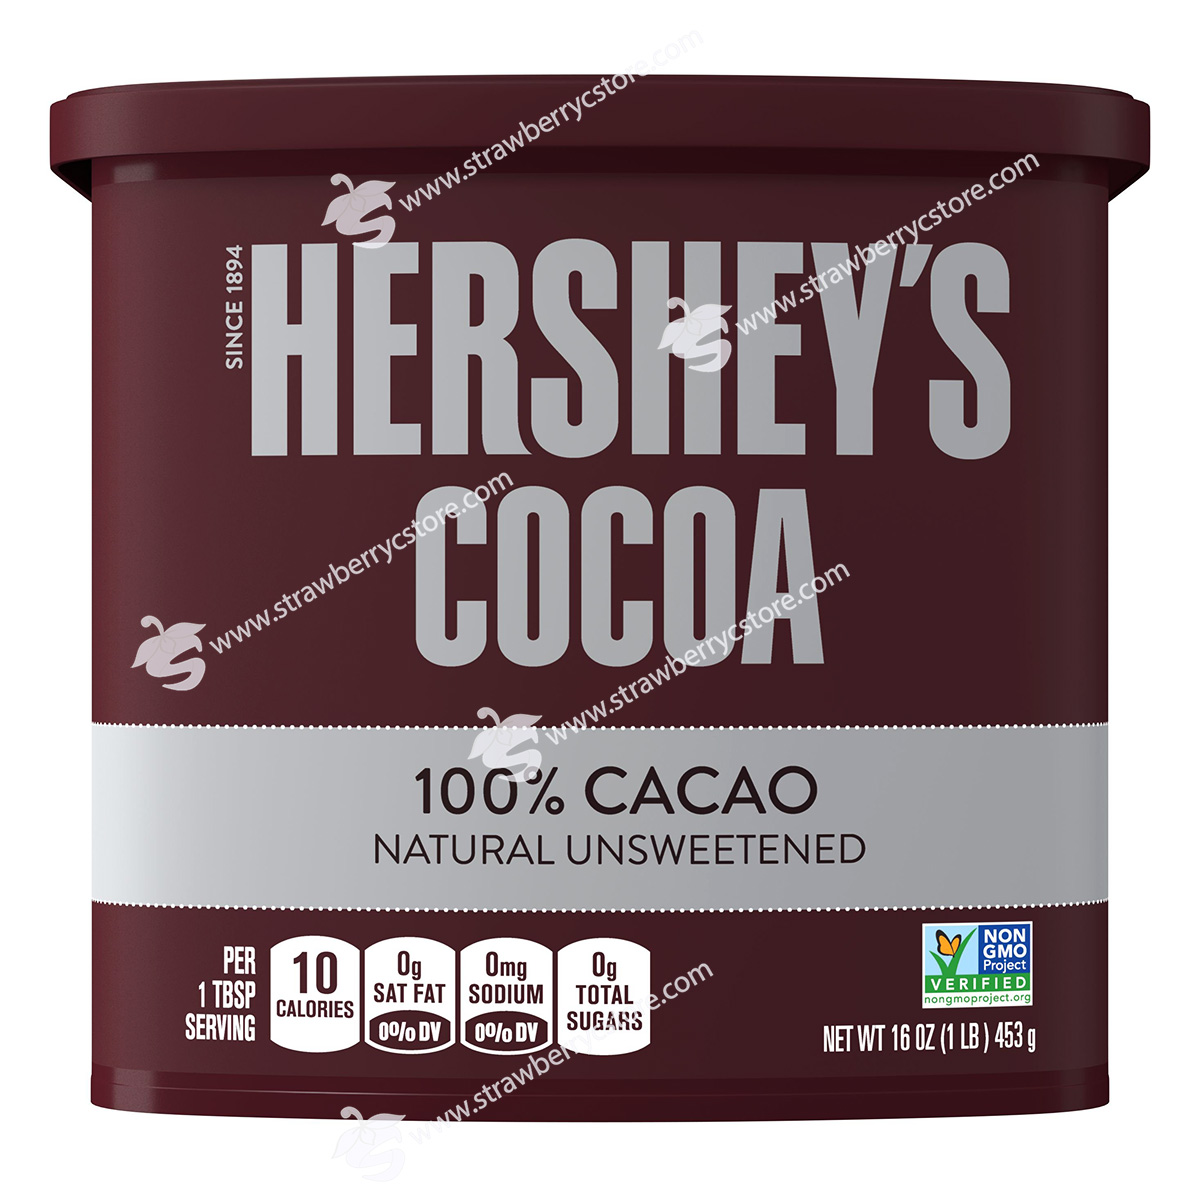 Bột Cacao Không Đường HERSHEY S COCOA 100% Cacao Natural Unsweetened Cocoa